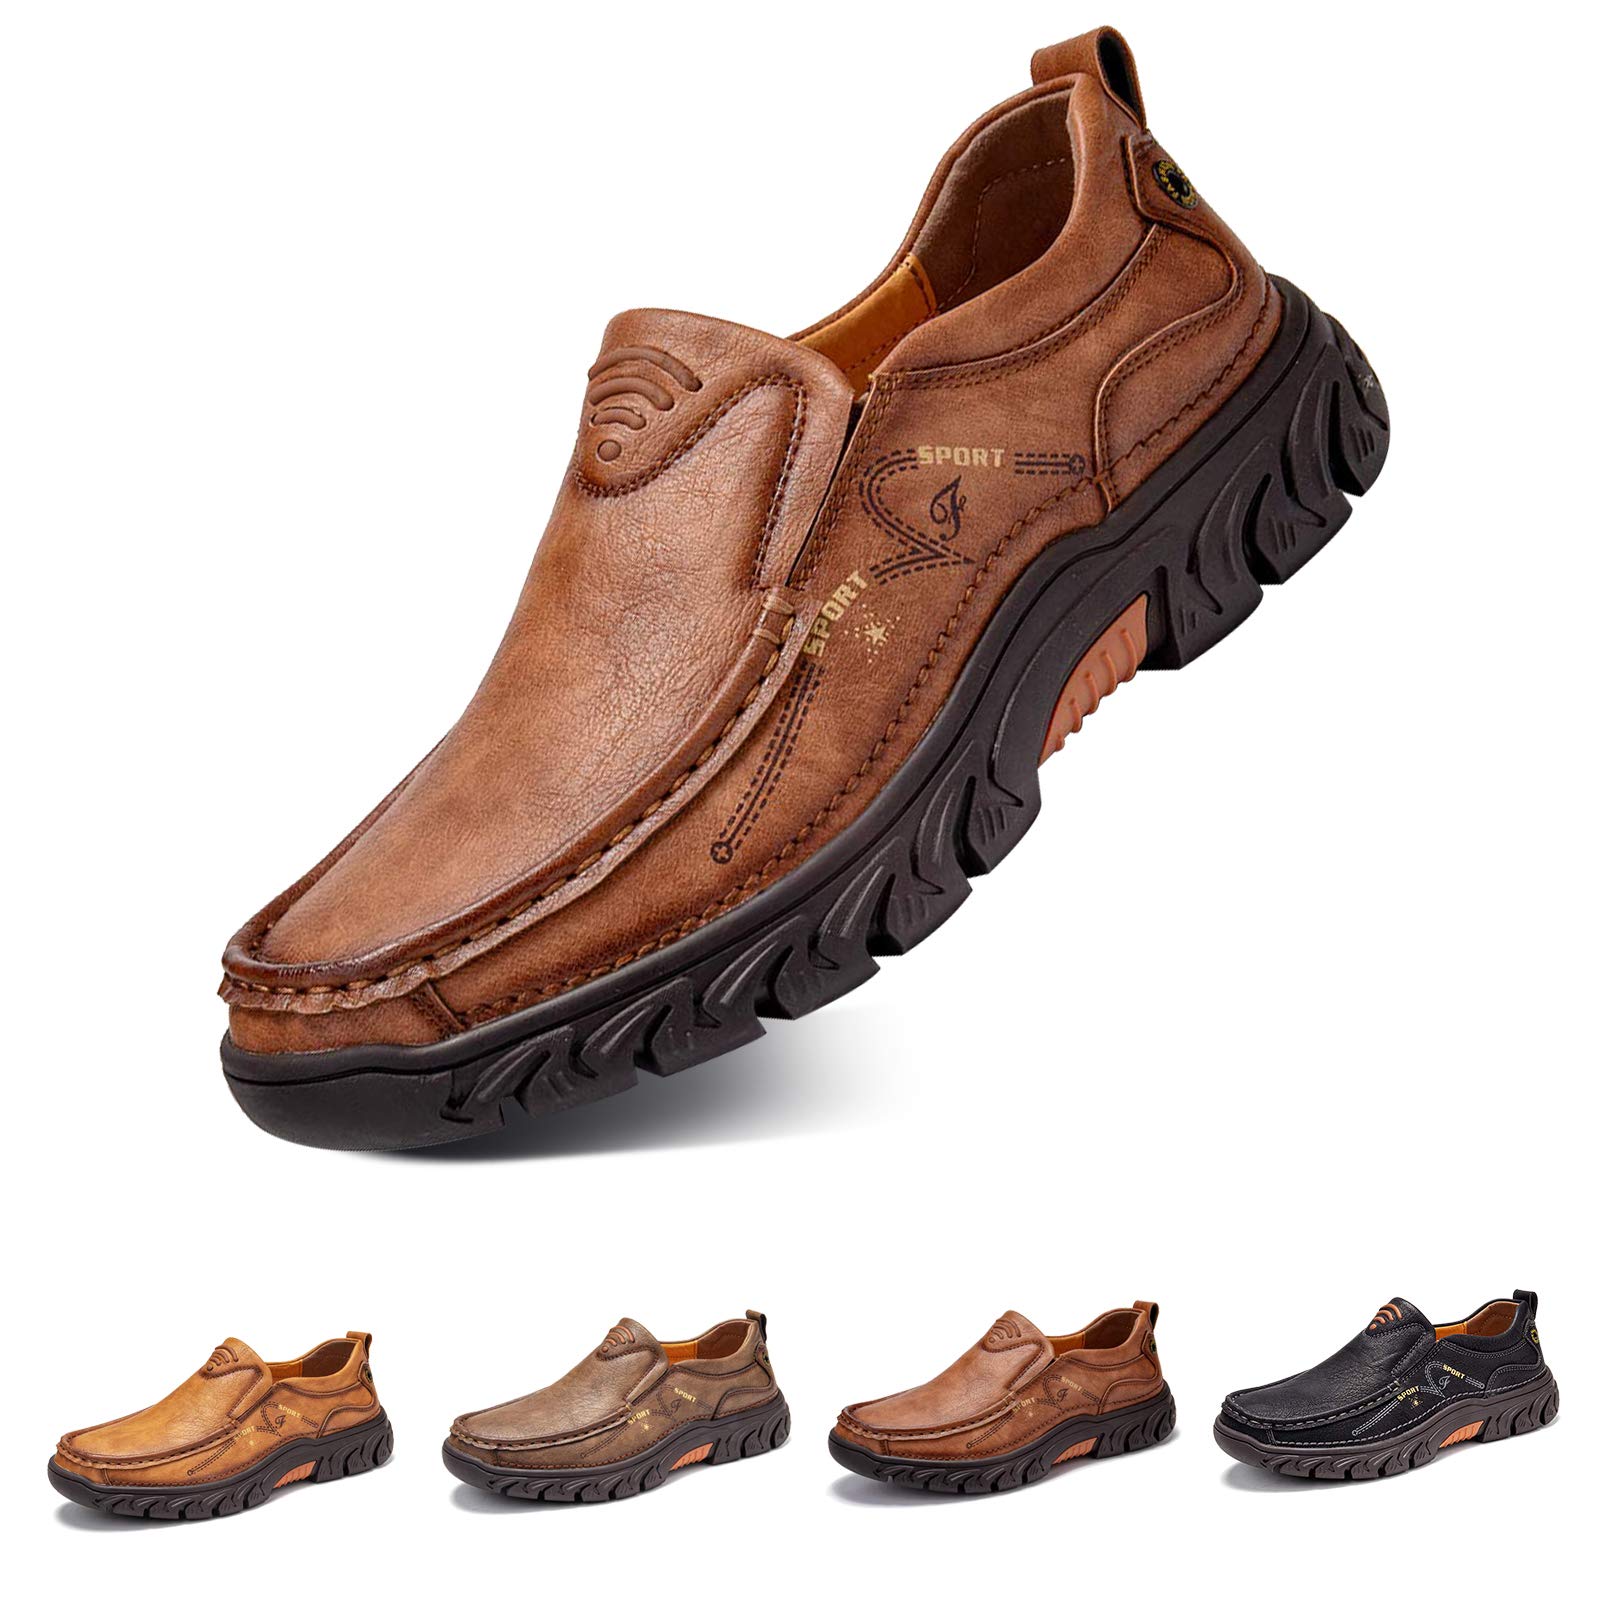 Mens Comfort Slip on Leather Casual Outdoor Walking Shoes